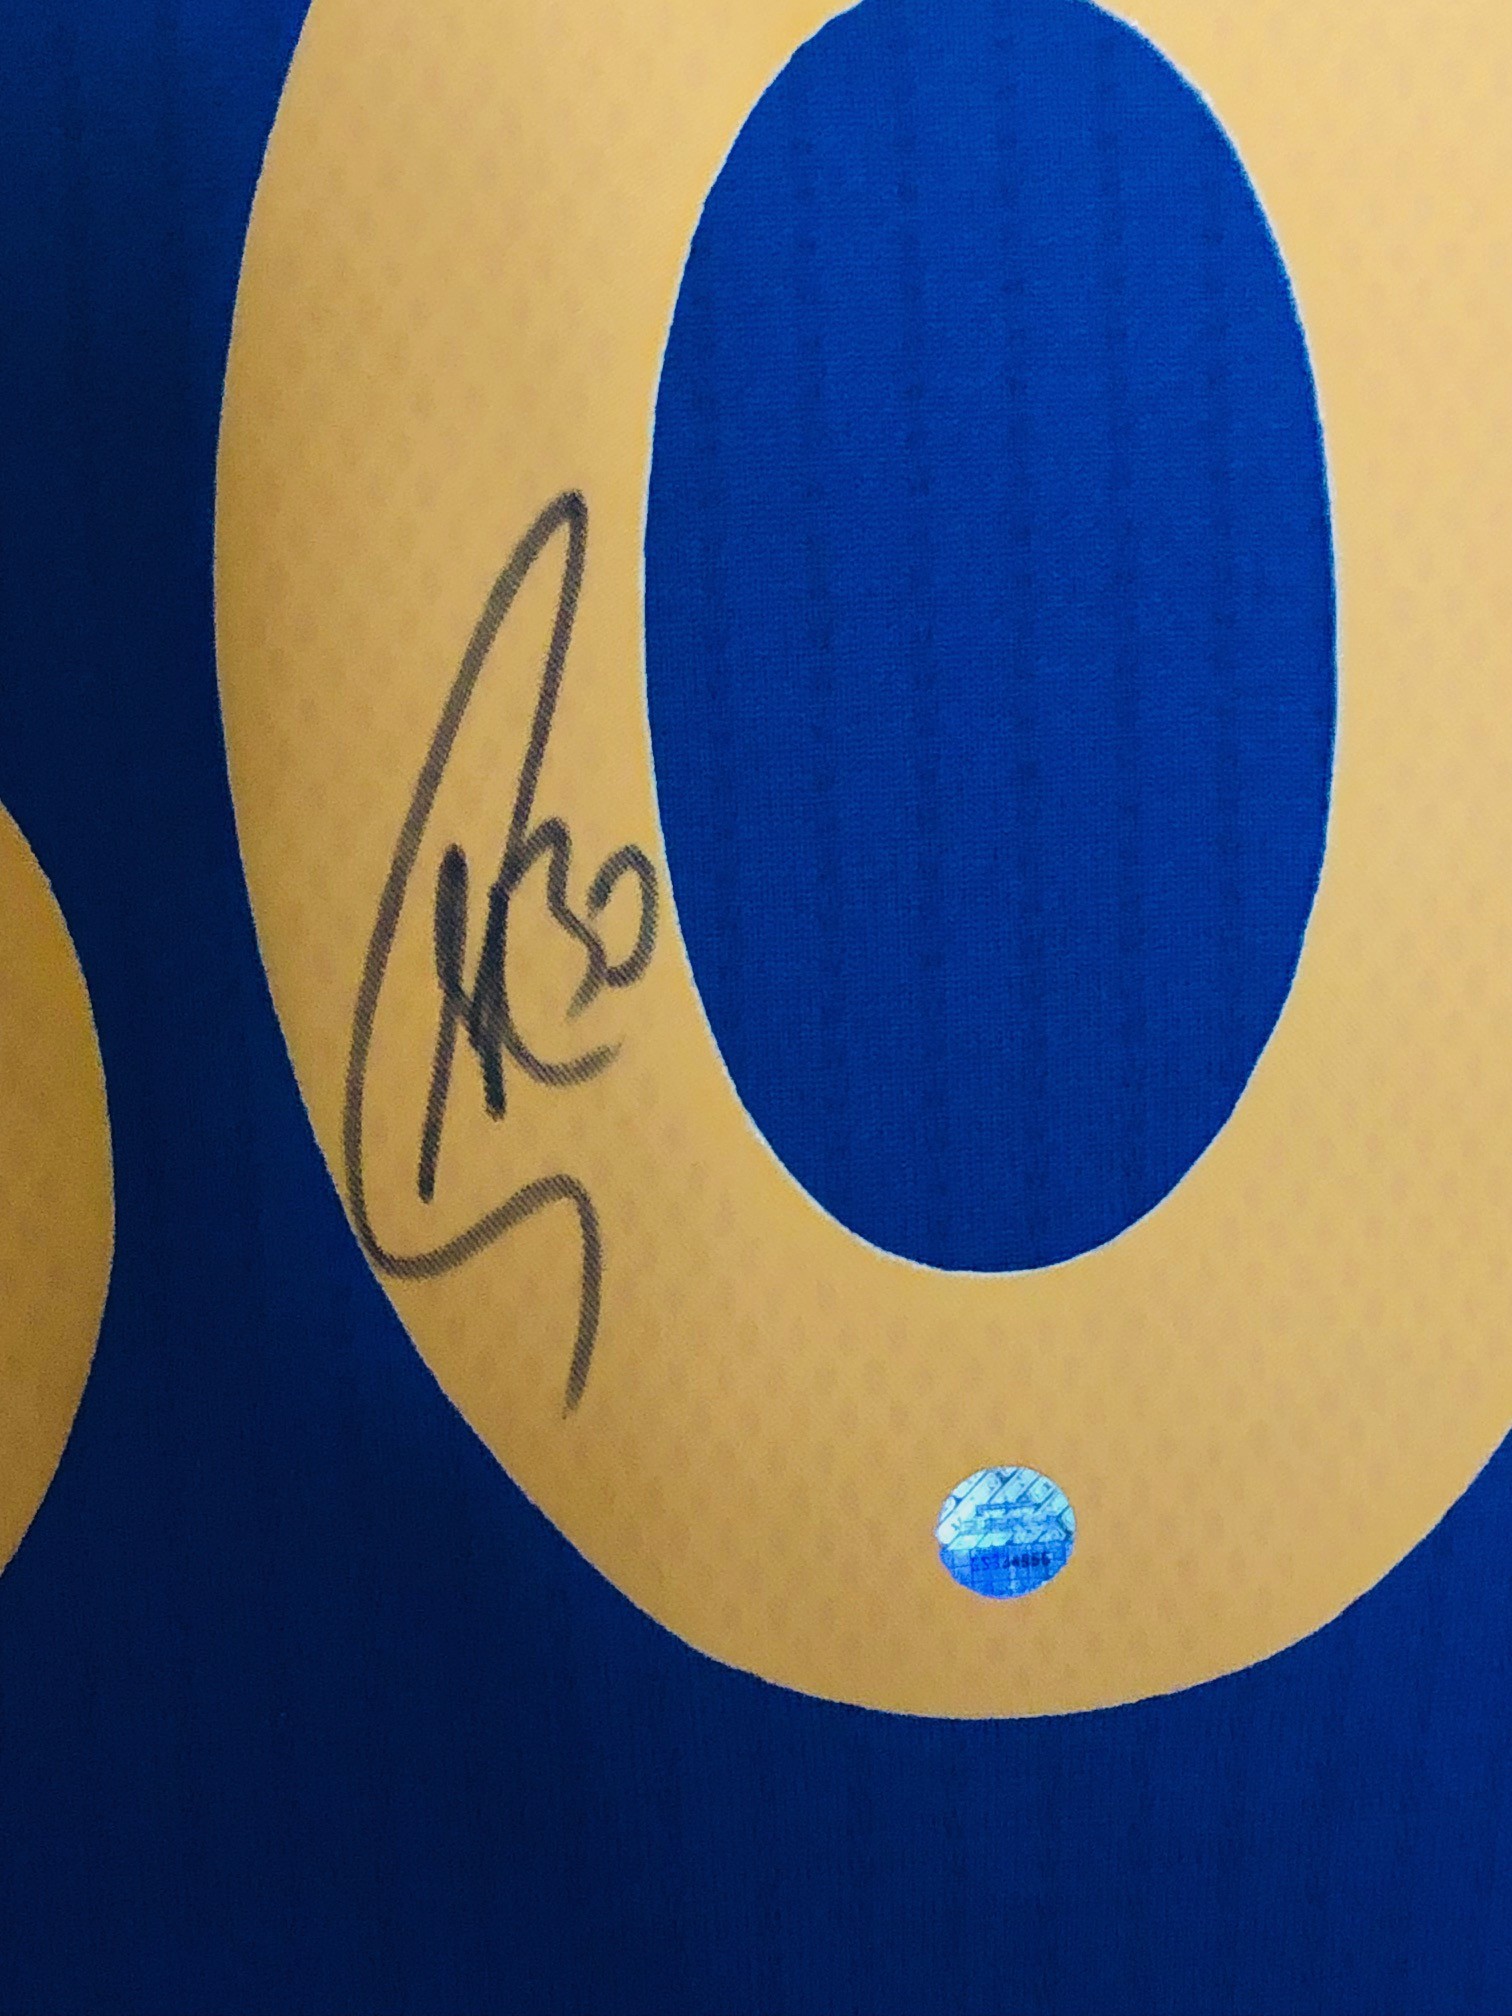 Charitybuzz: Steph Curry Signed Warriors Jersey Framed